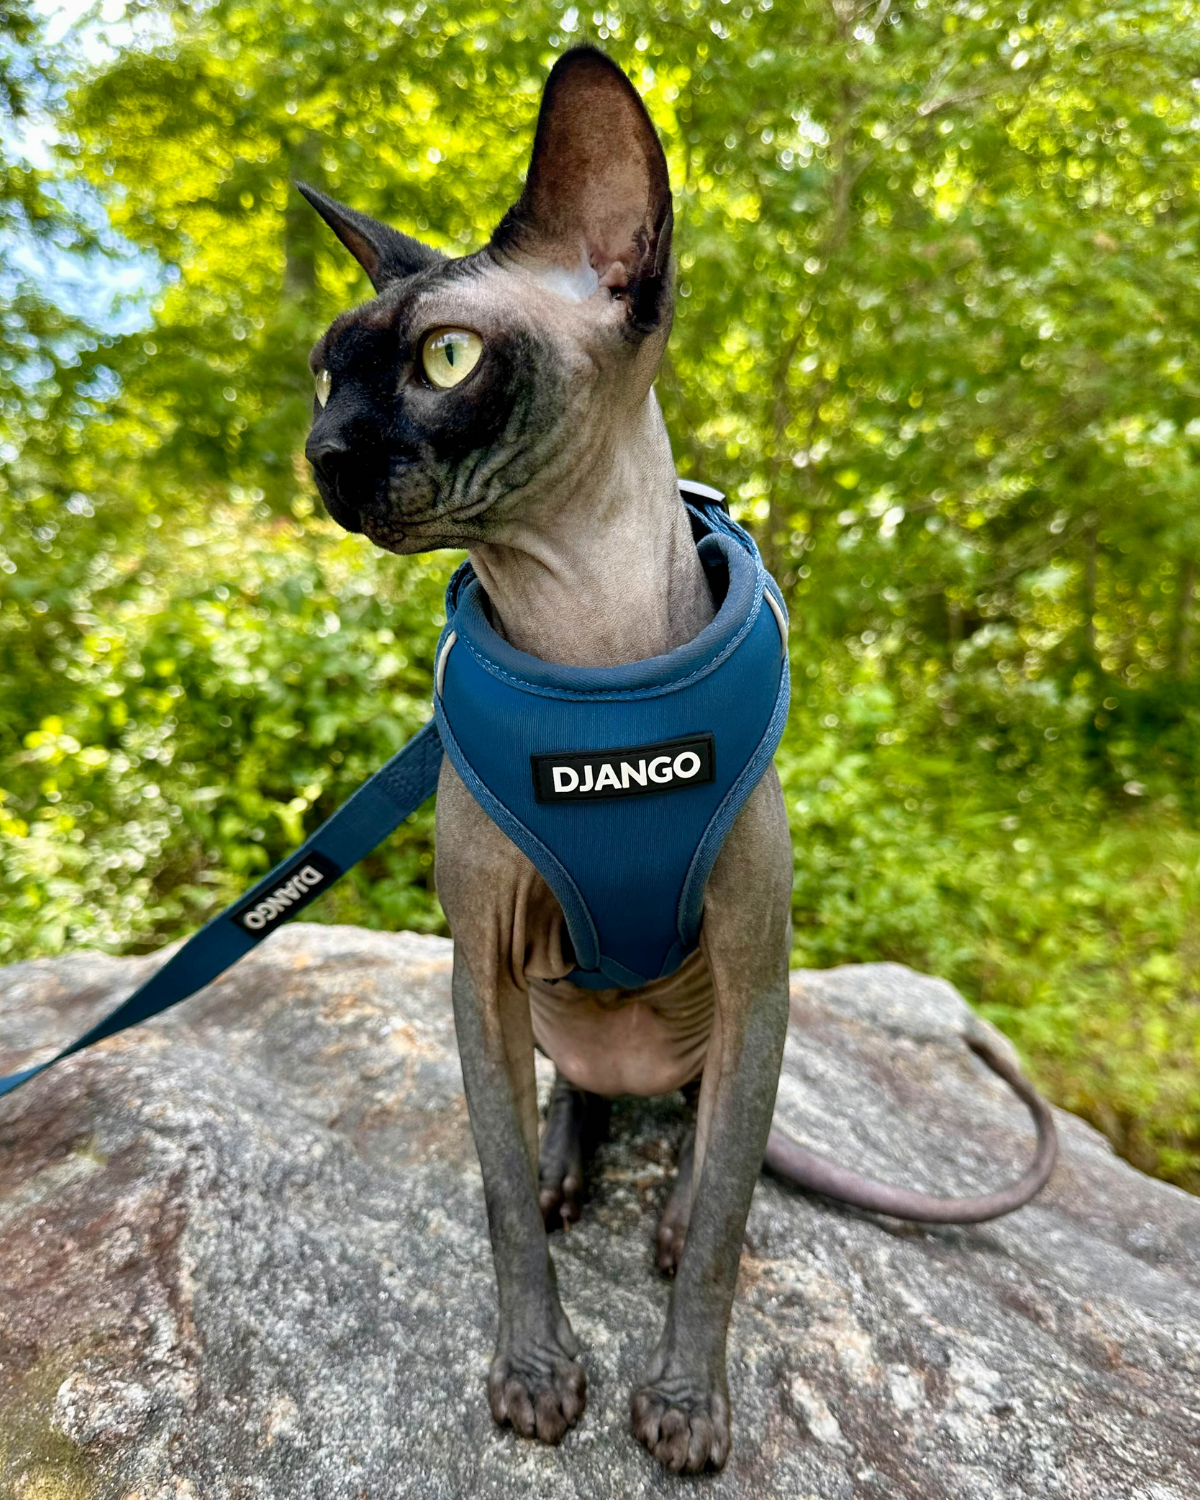 Estelle is a Sphinx cat and wears size small in DJANGO's Adventure Cat Harness beautifully. Sphinx cats love the soft and padded harness body which lays gently against their hairless frame. - djangobrand.com